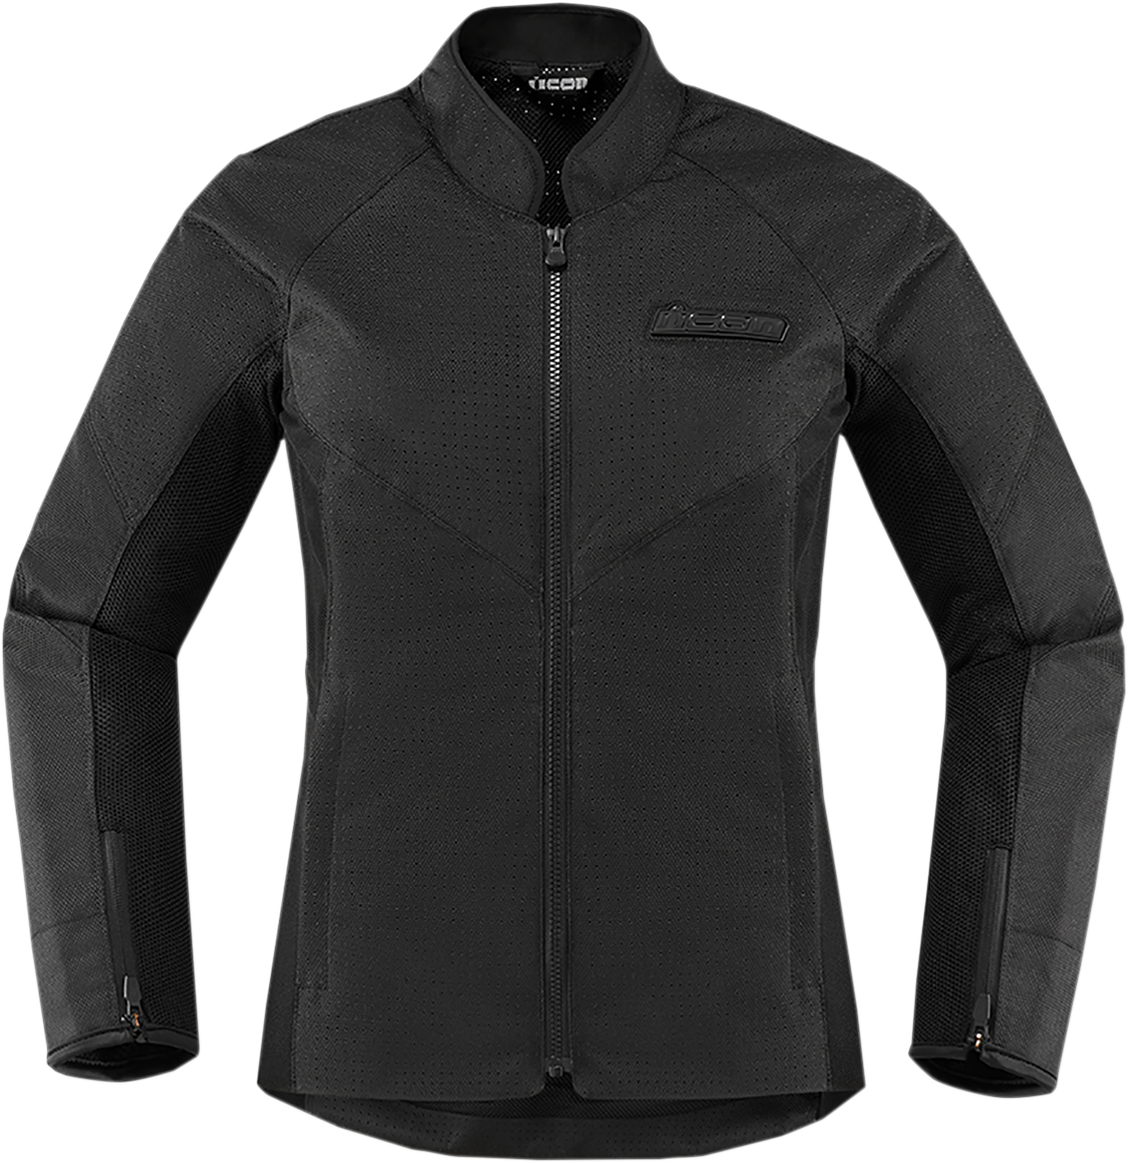 ICON Women's Hooligan Perf Jacket - Stealth - Large 2822-1332